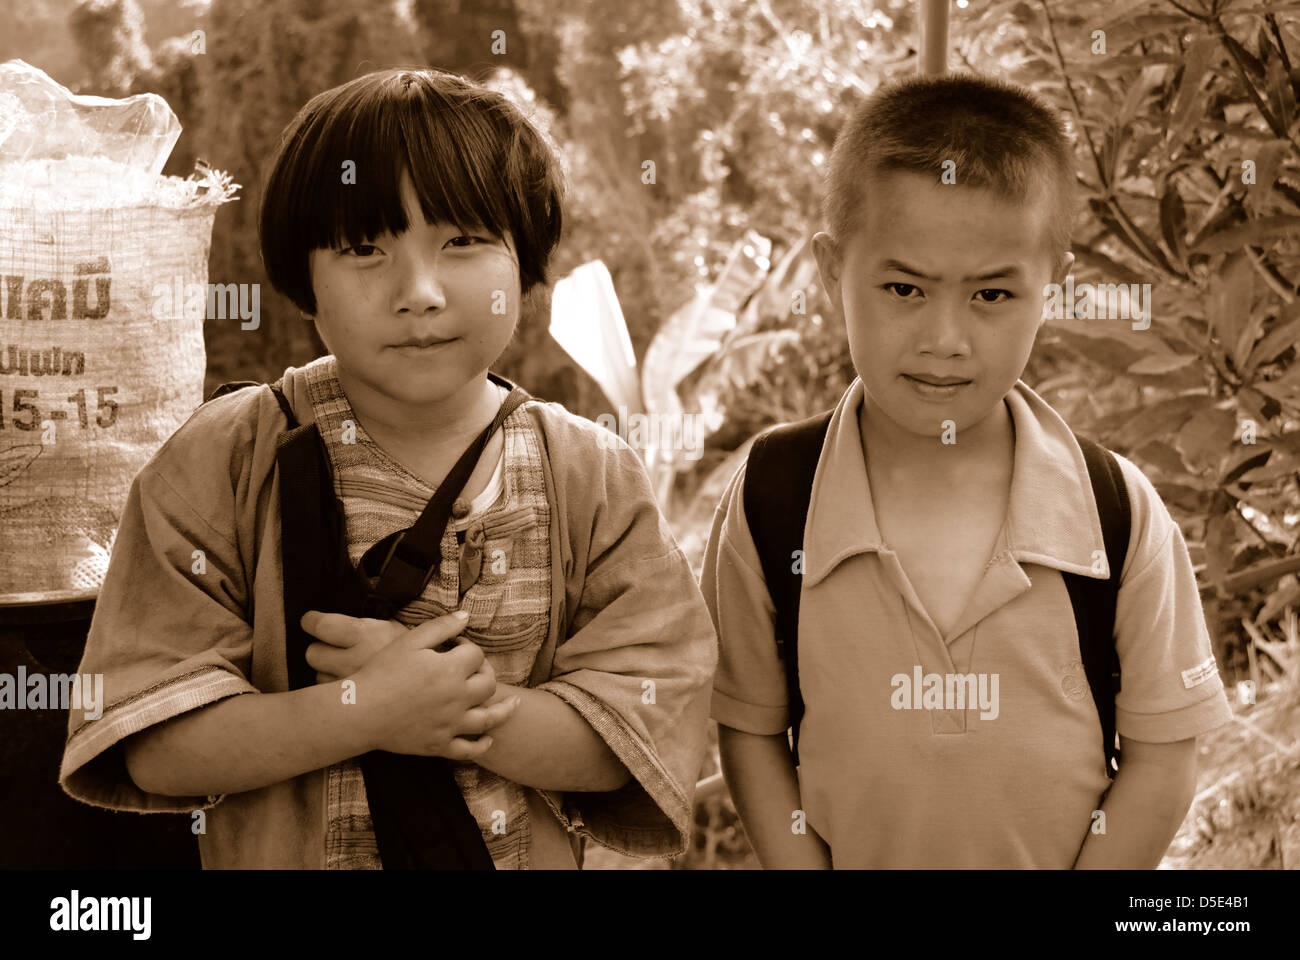 Two children on their way home from school from the bury toey village Chiang mai northern Thailand taken on 01/07/2009 Stock Photo